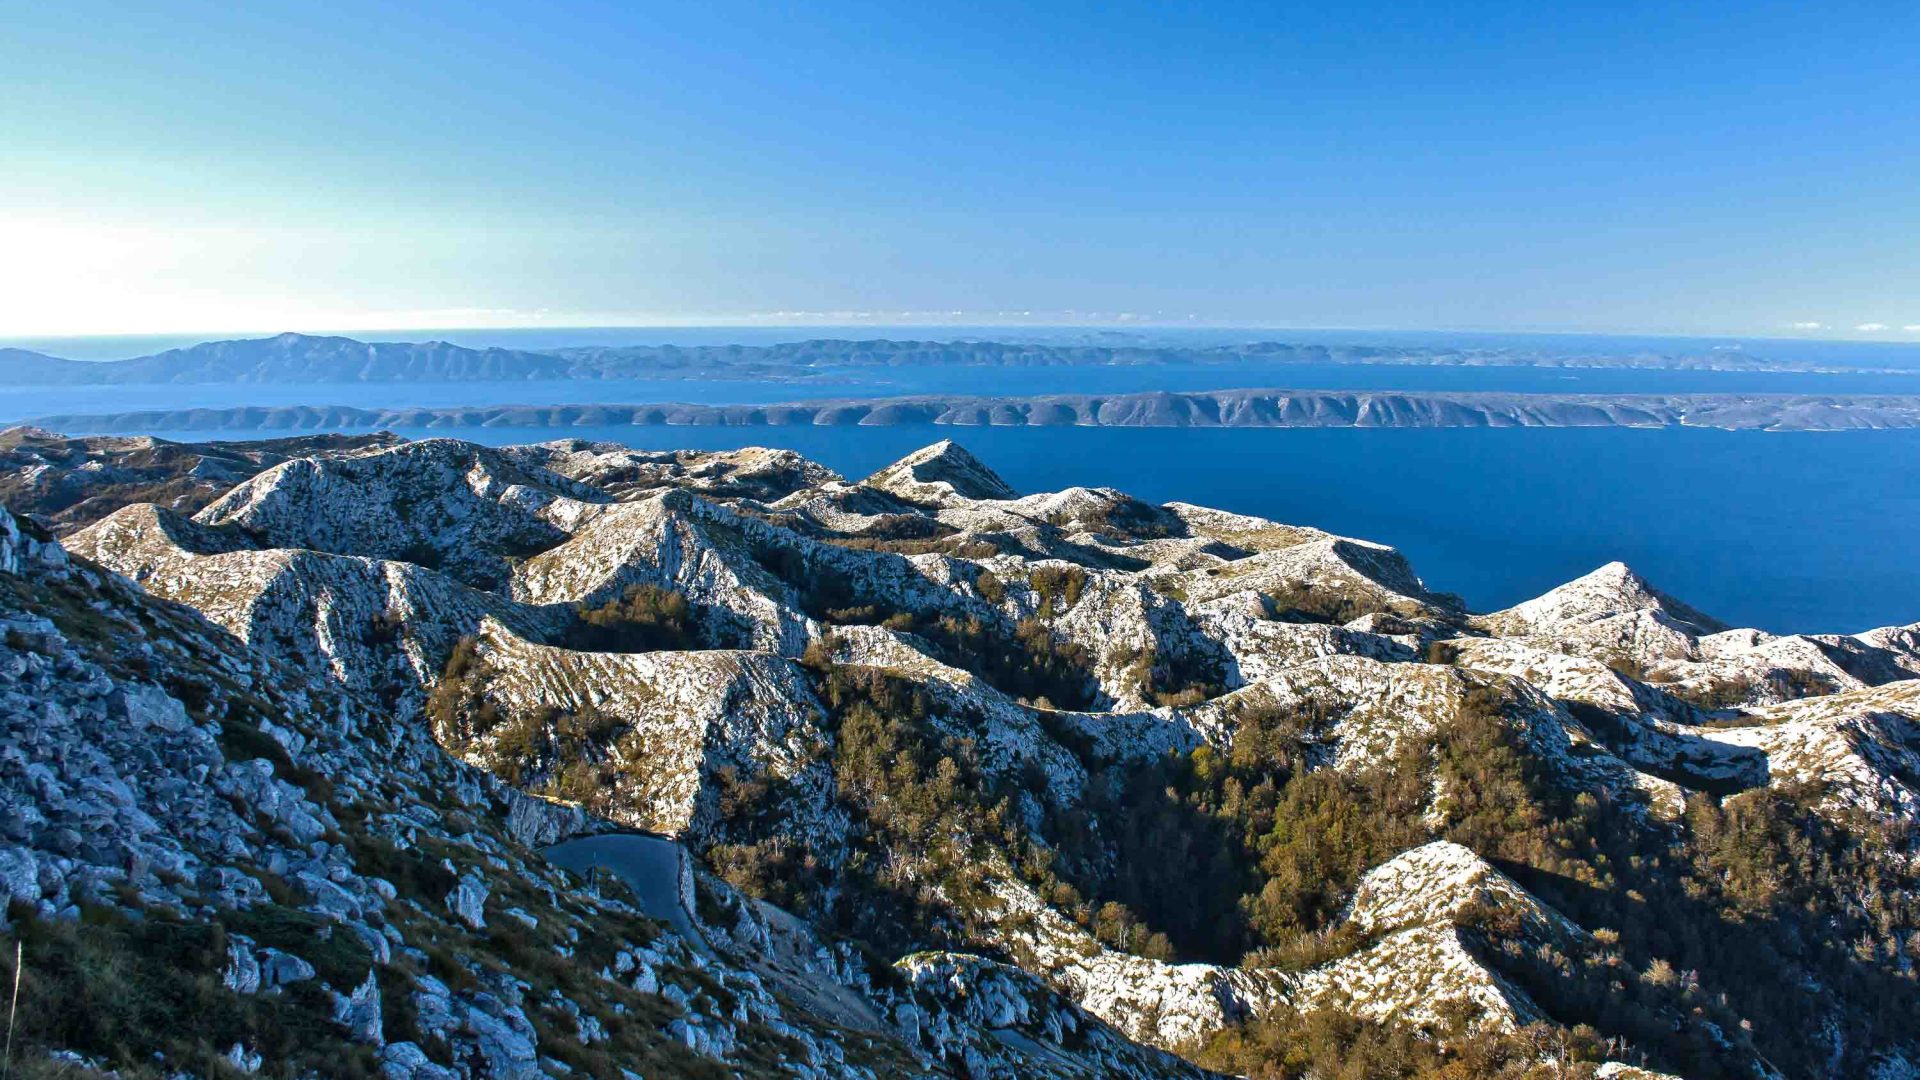 The Dinaric Alps with sea in the background.